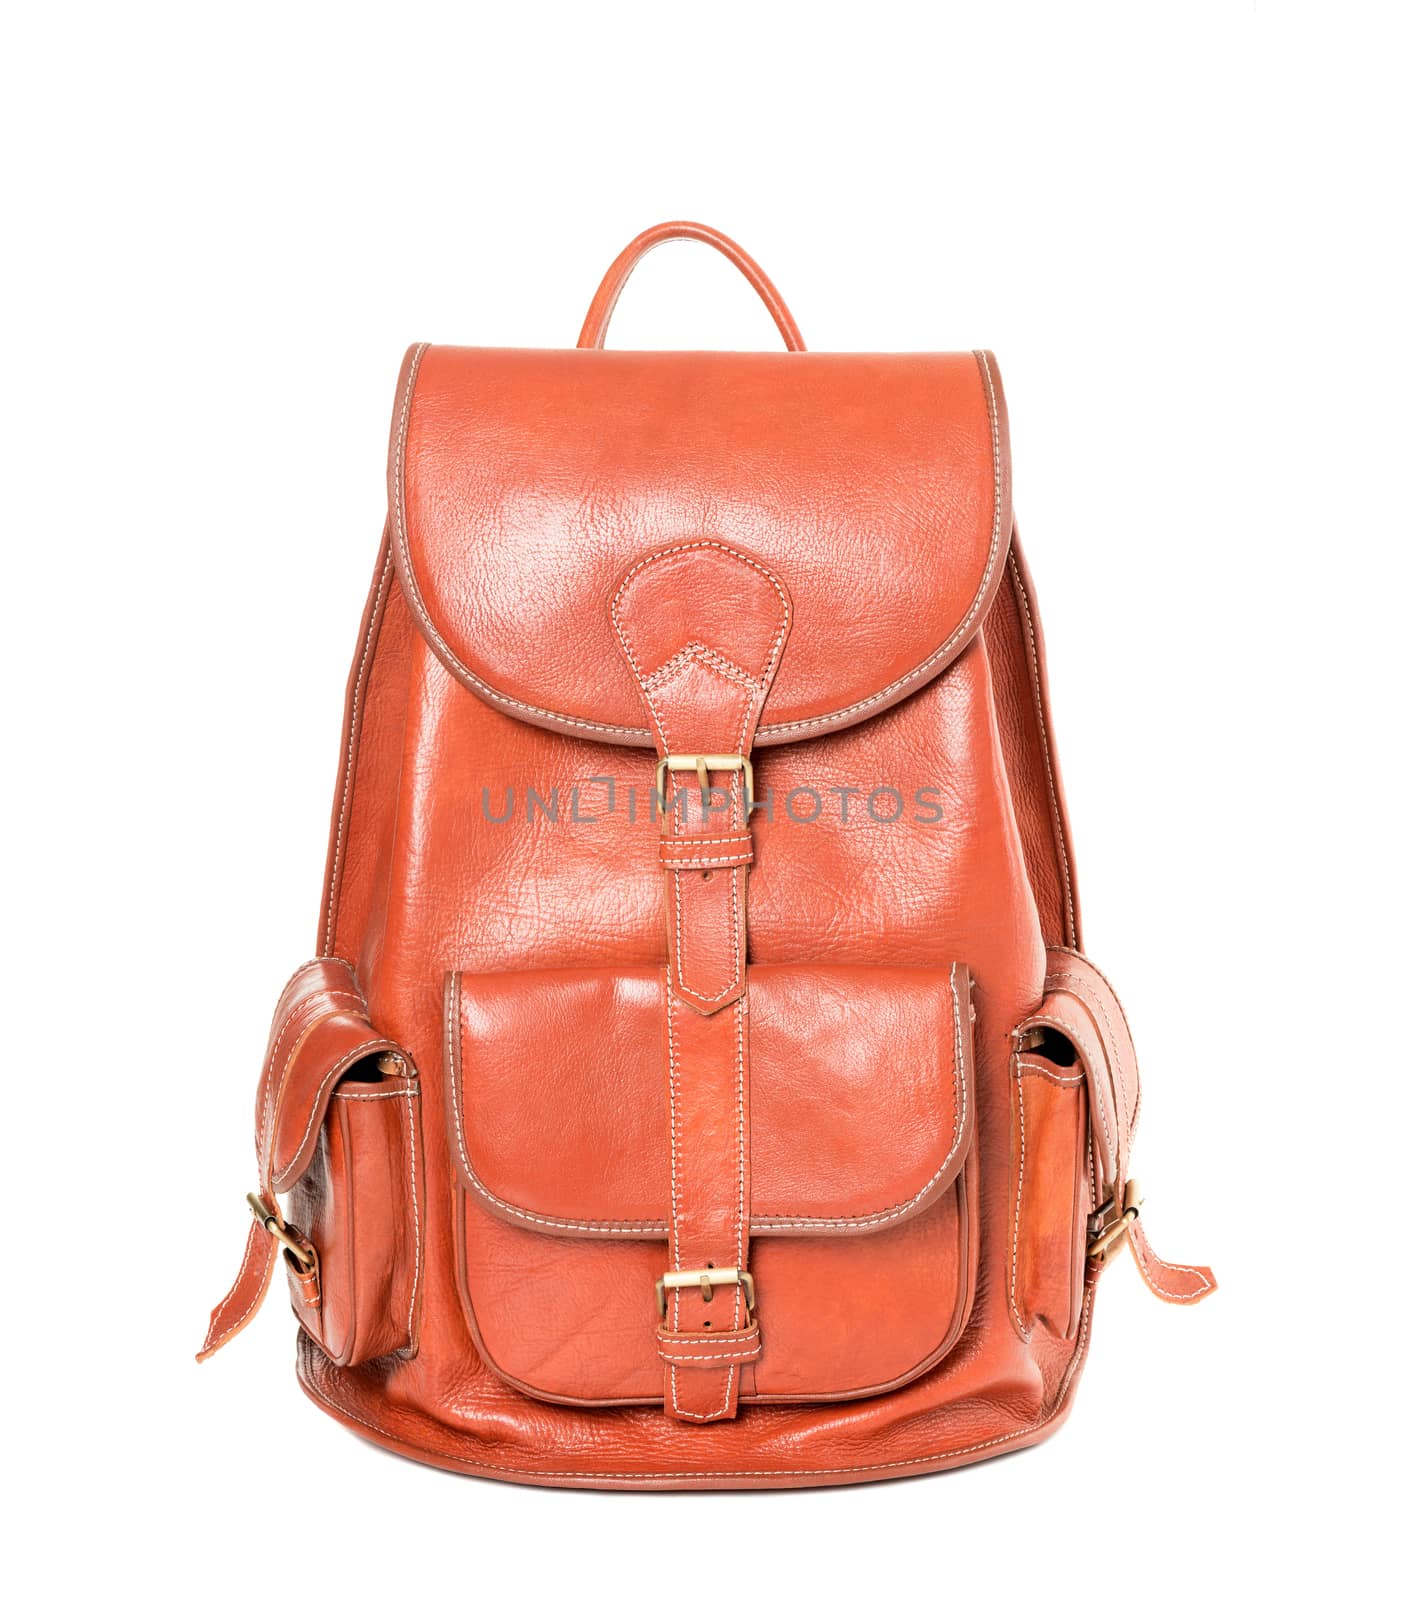 Orange leather backpack standing isolated on white background